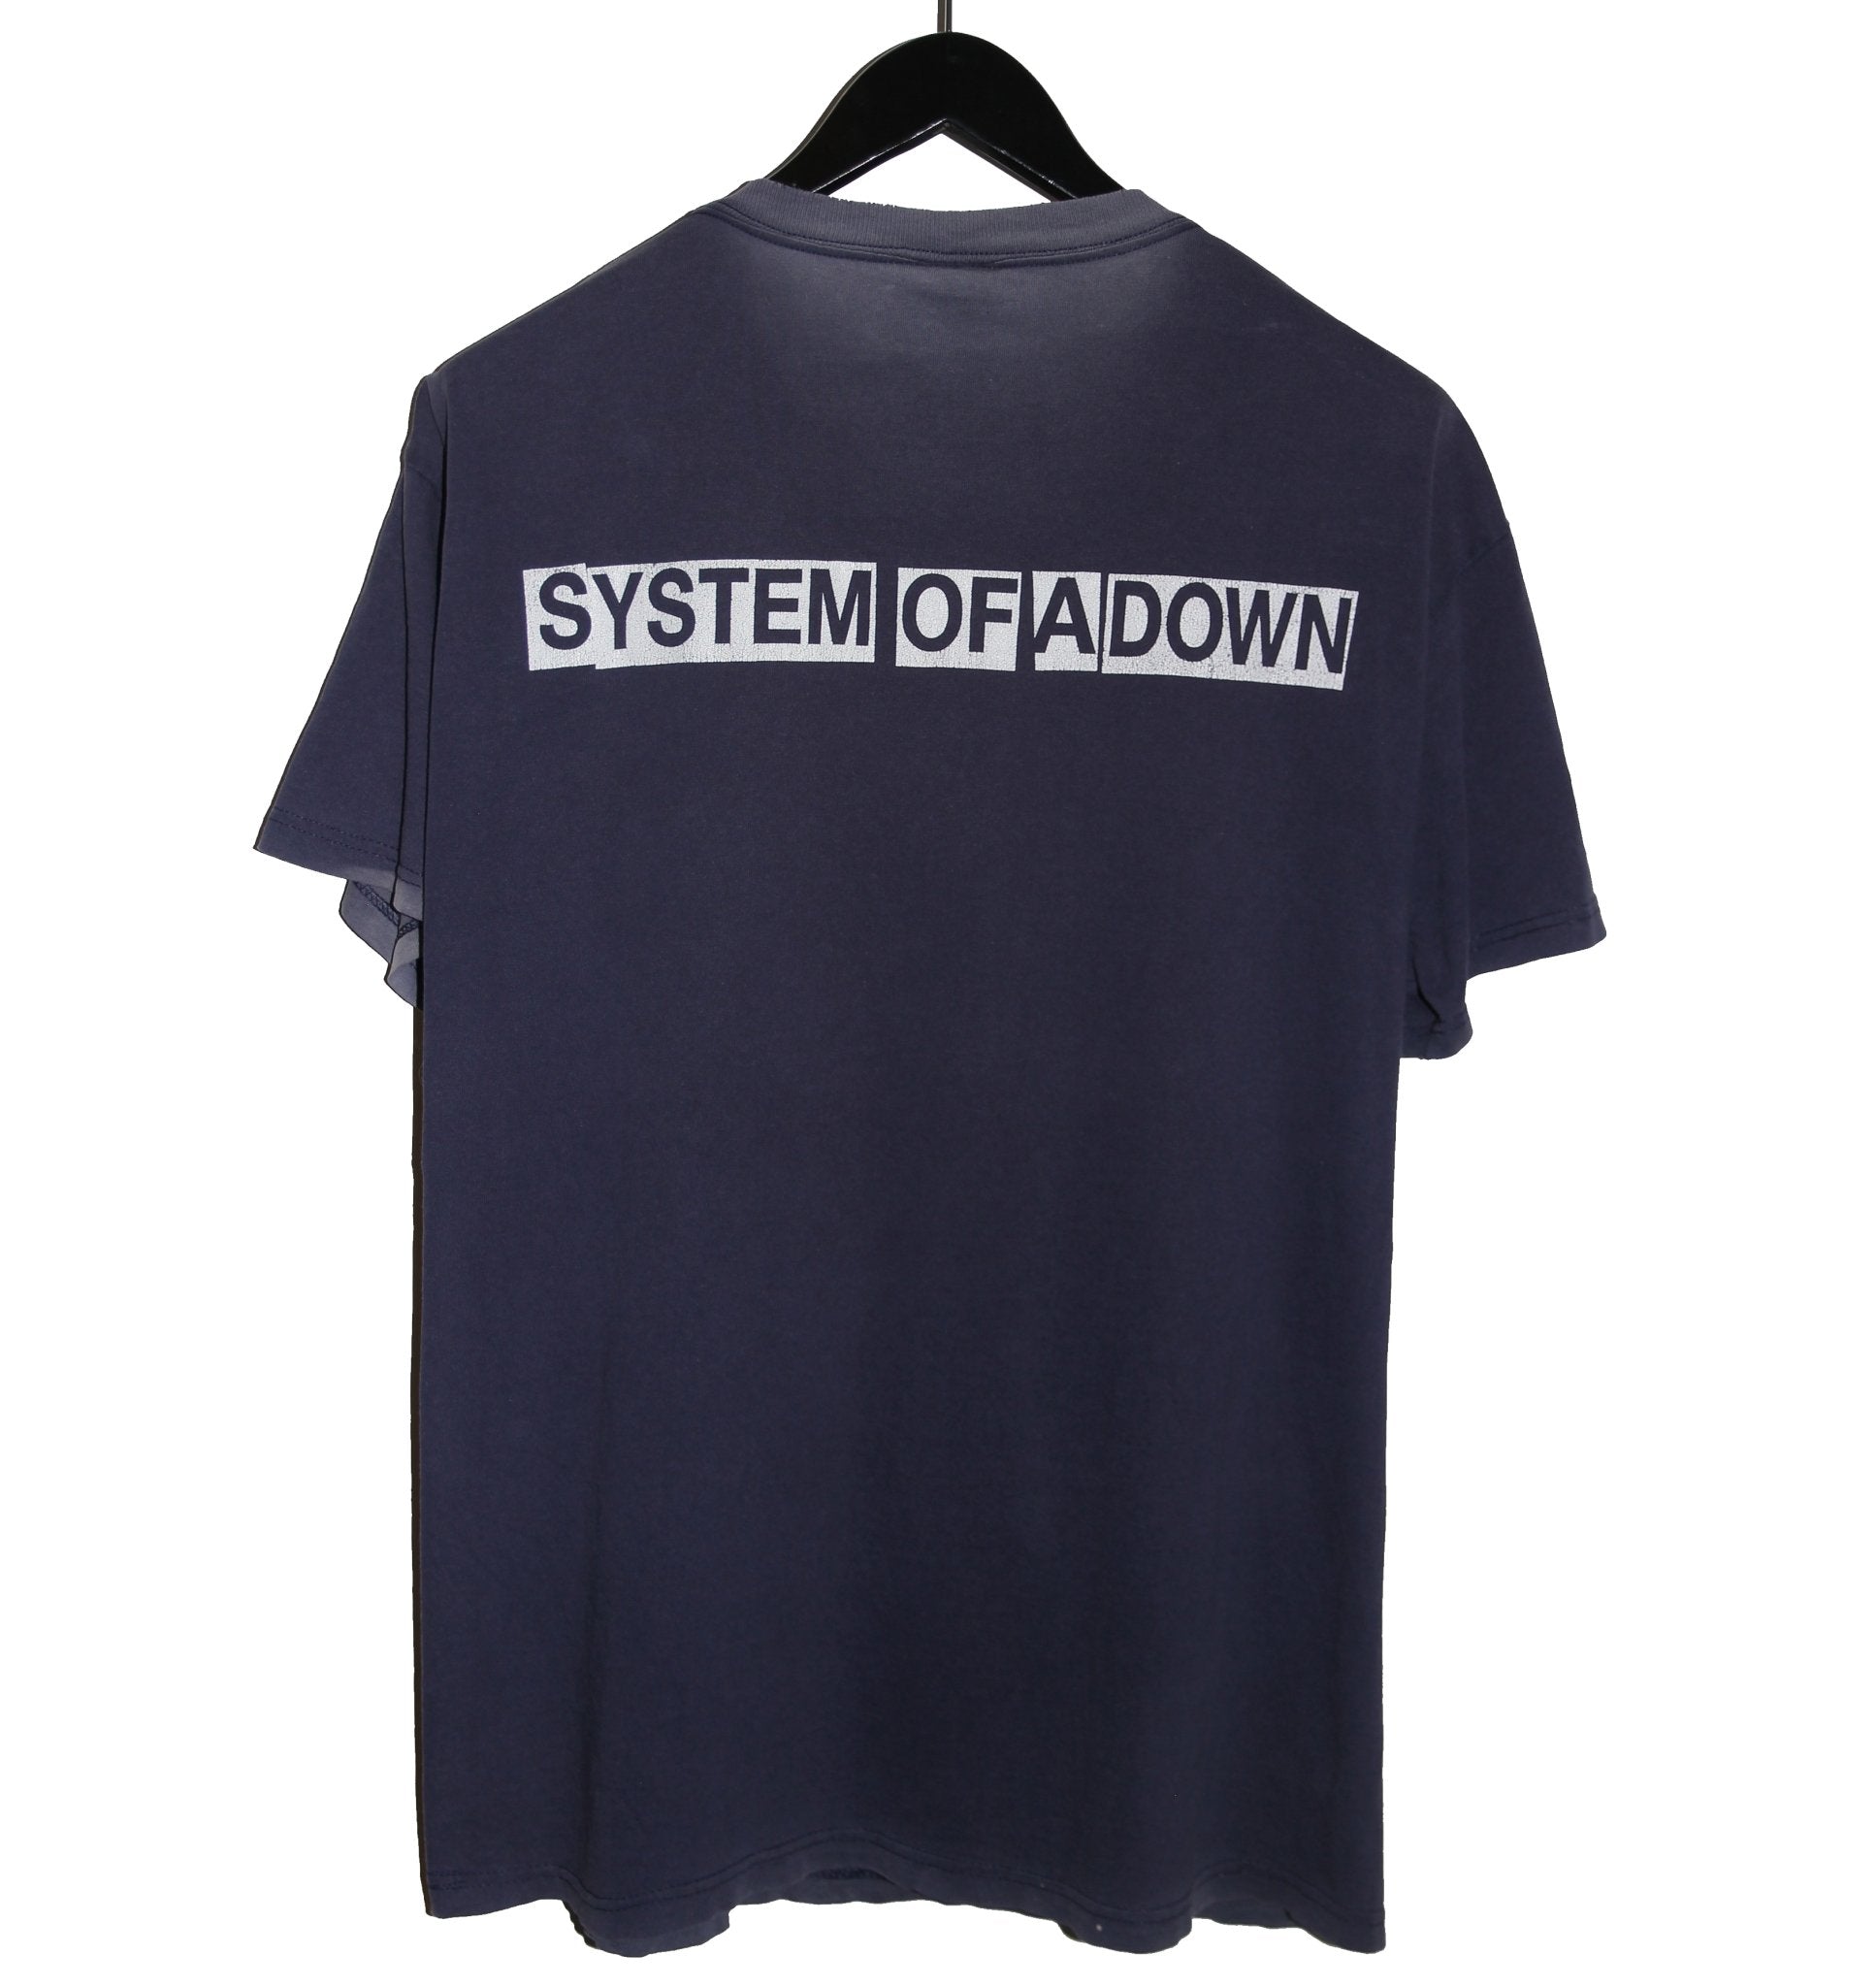 System of a Down 1996 Shirt - Faded AU